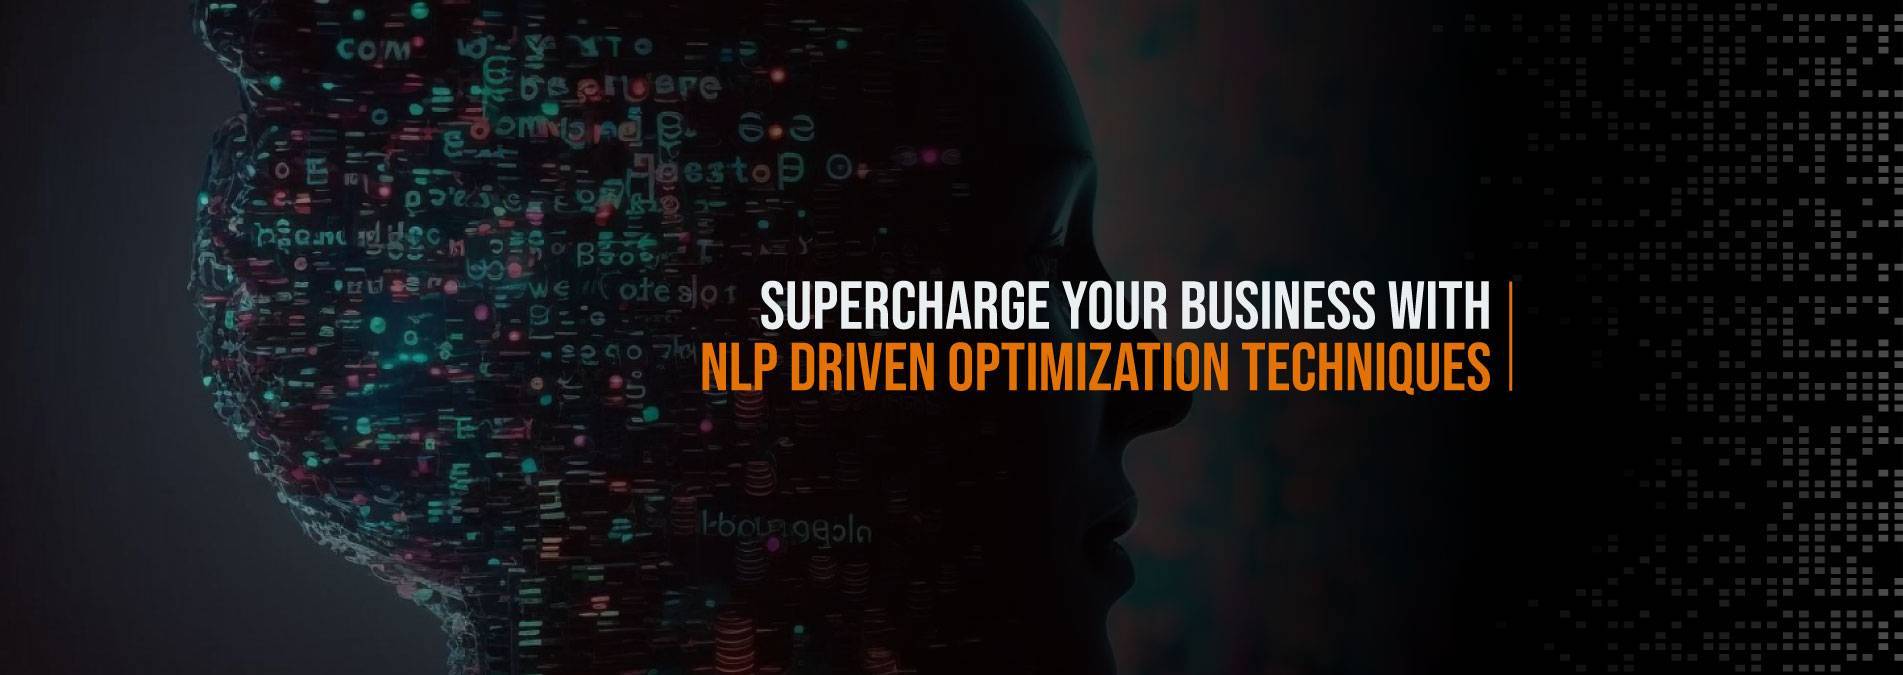 Supercharge-Your-Business-with-NLP-Driven-Optimization-Techniques Internet Soft